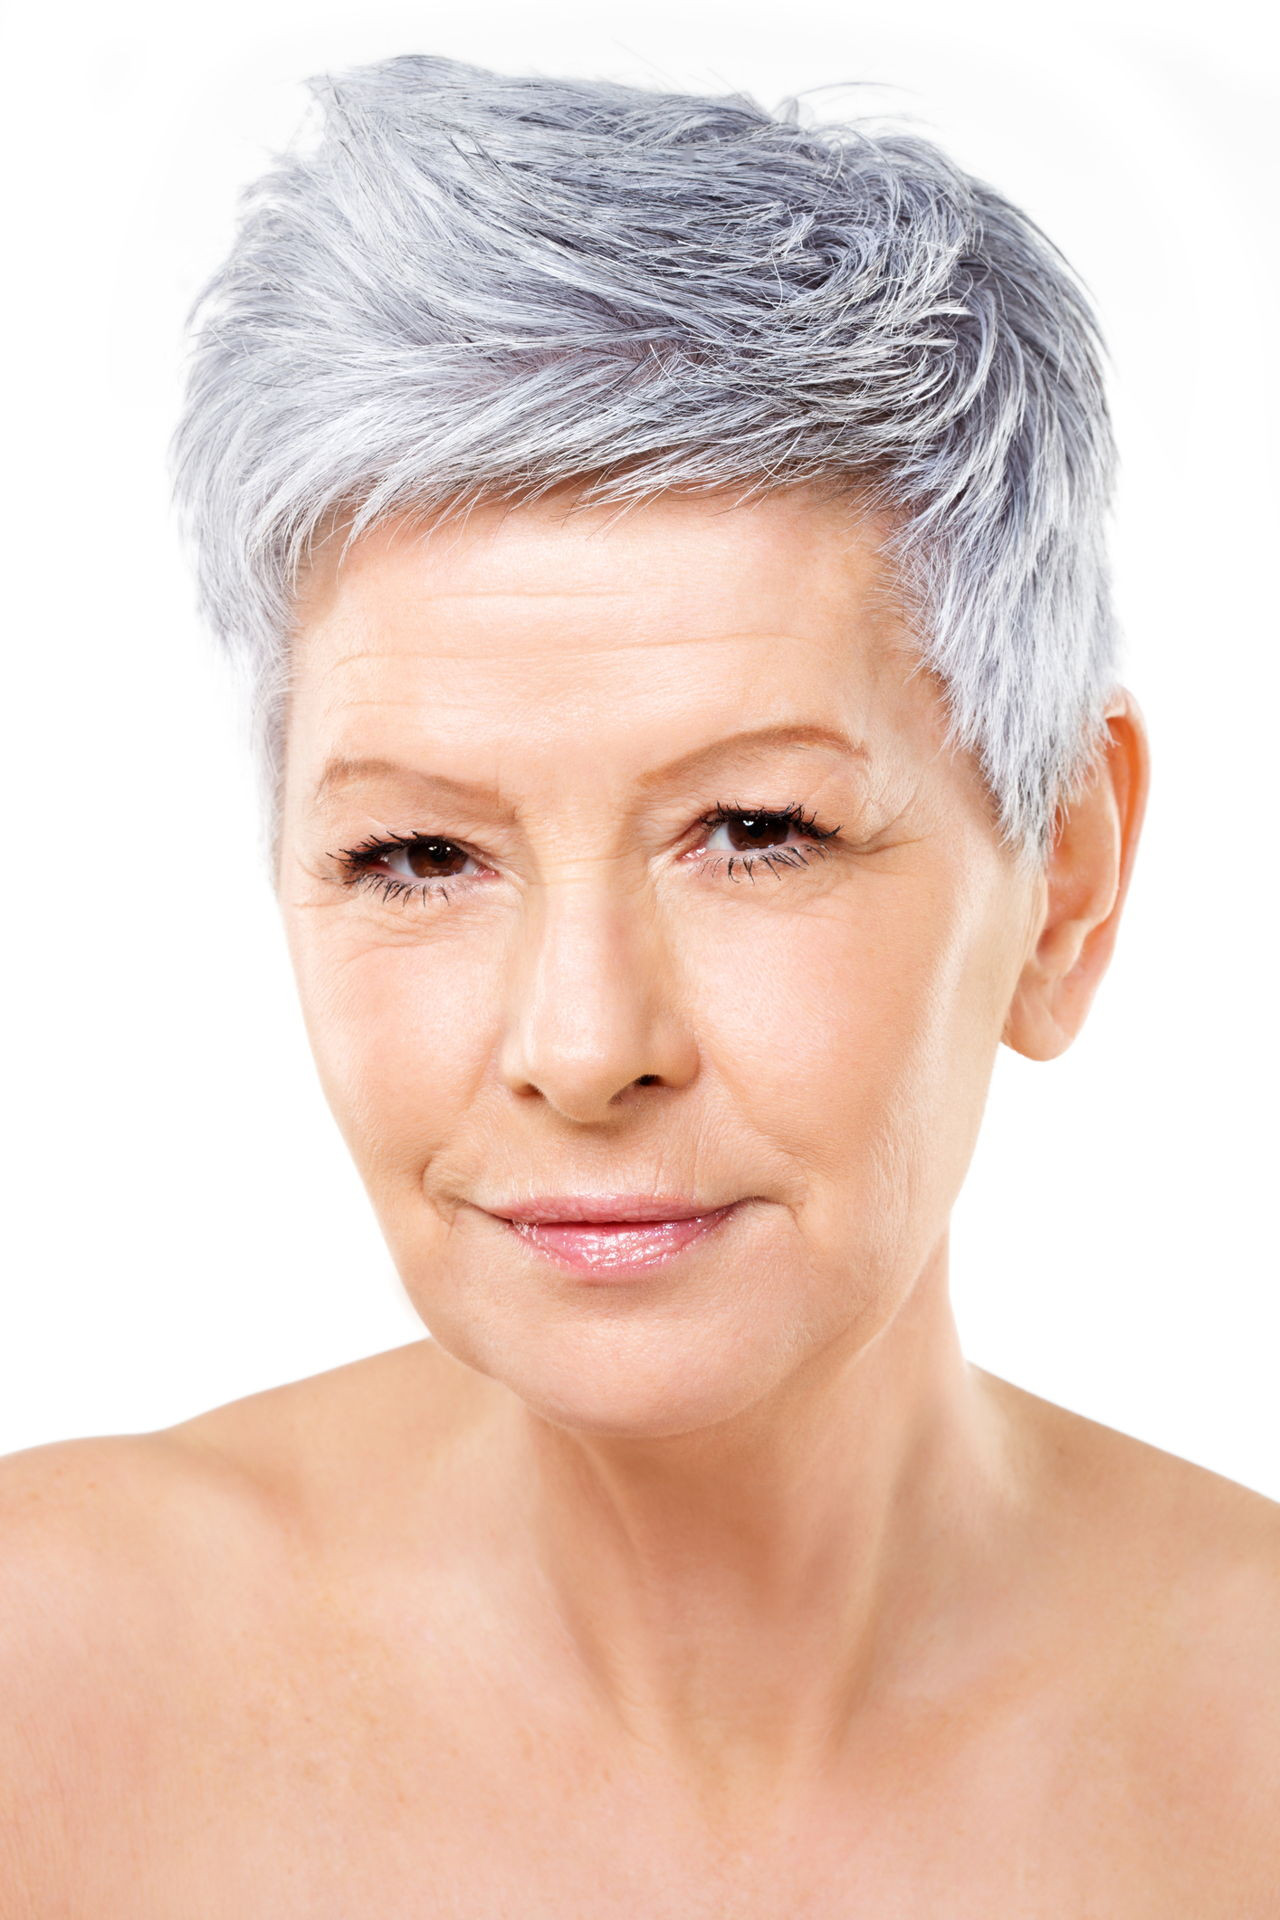 Short Hair Women'S Haircuts
 Curly Short Hairstyles for Women Over 50 That Look